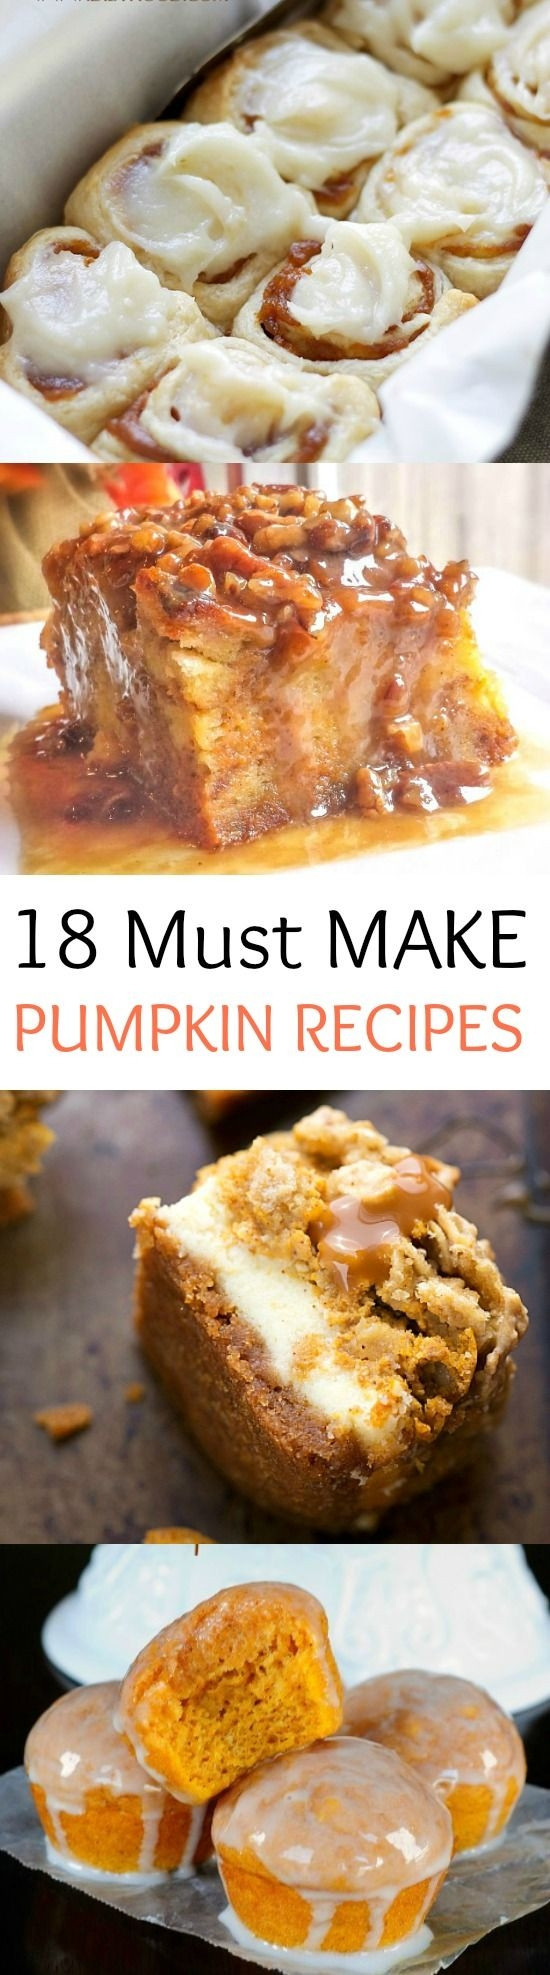 Most Popular Thanksgiving Desserts
 The Most Spectacular Pumpkin Recipes EVER Thanksgiving